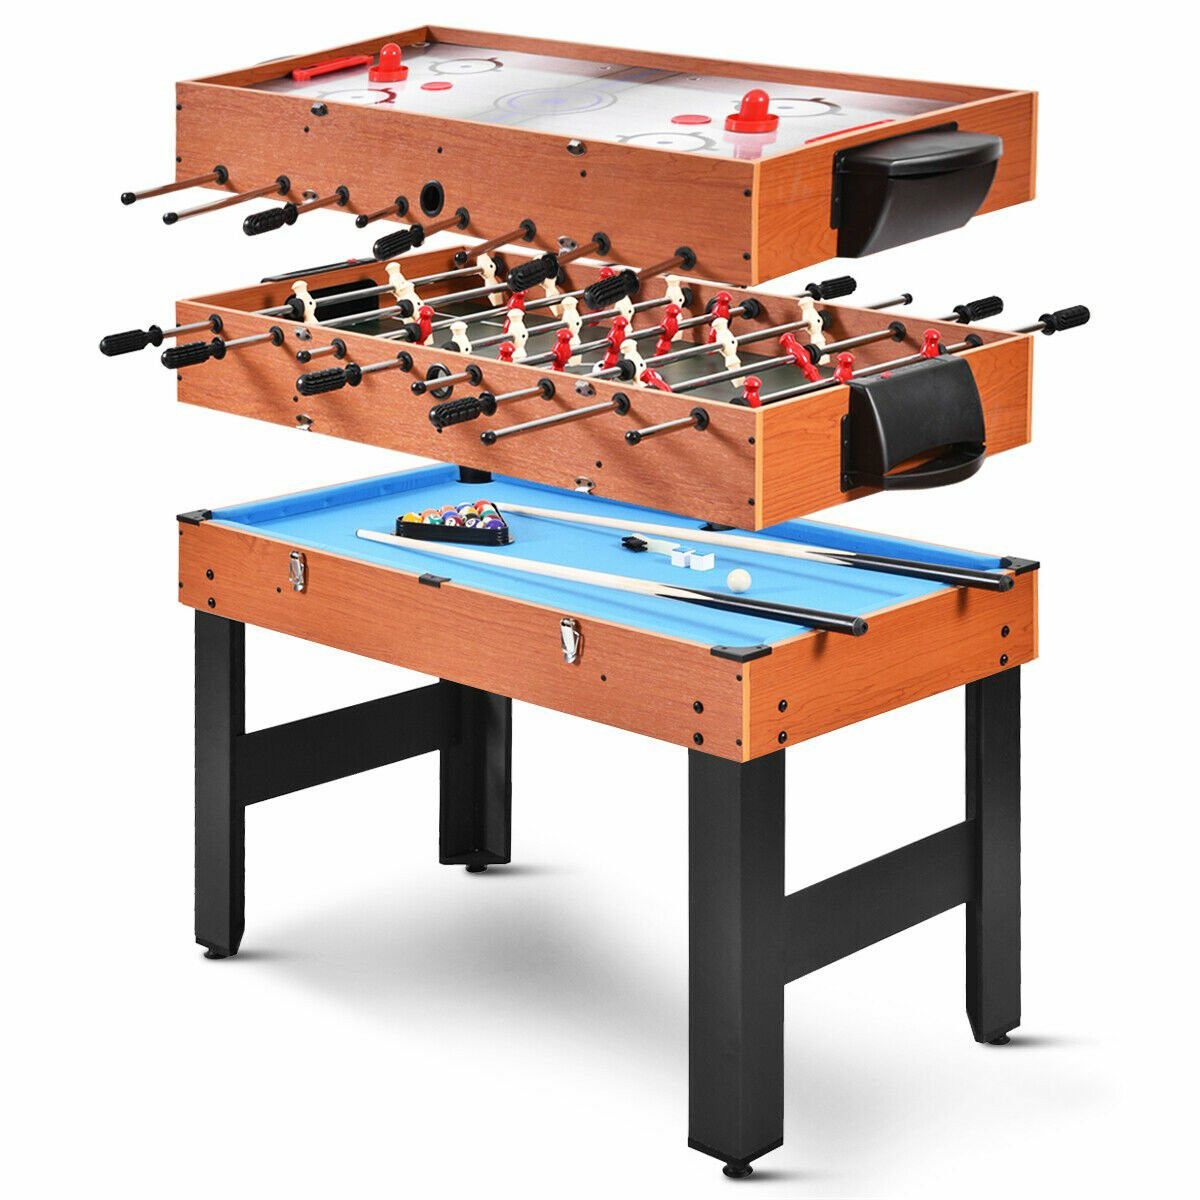 A22-19- 48'' 3-In-1 Multi Combo Game Table Foosball Soccer Billiards Pool Hockey For Kids